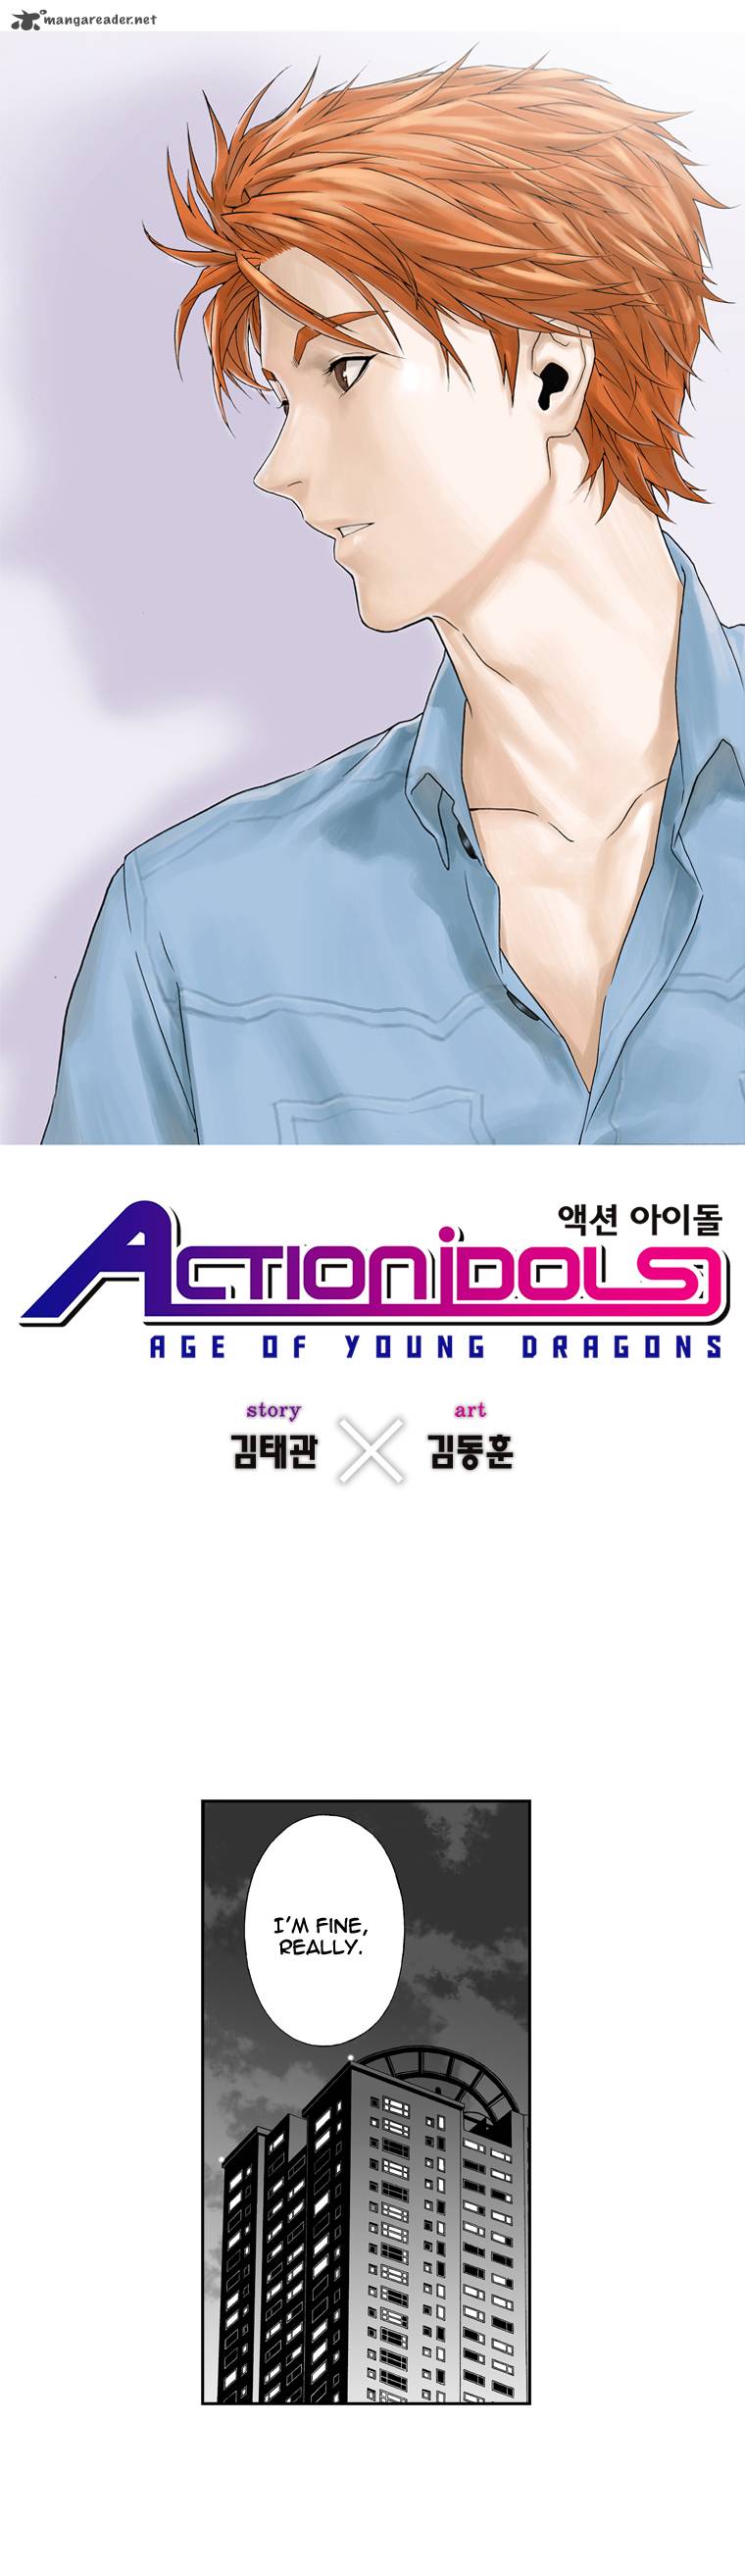 Action Idols Age Of Young Dragons 11 2